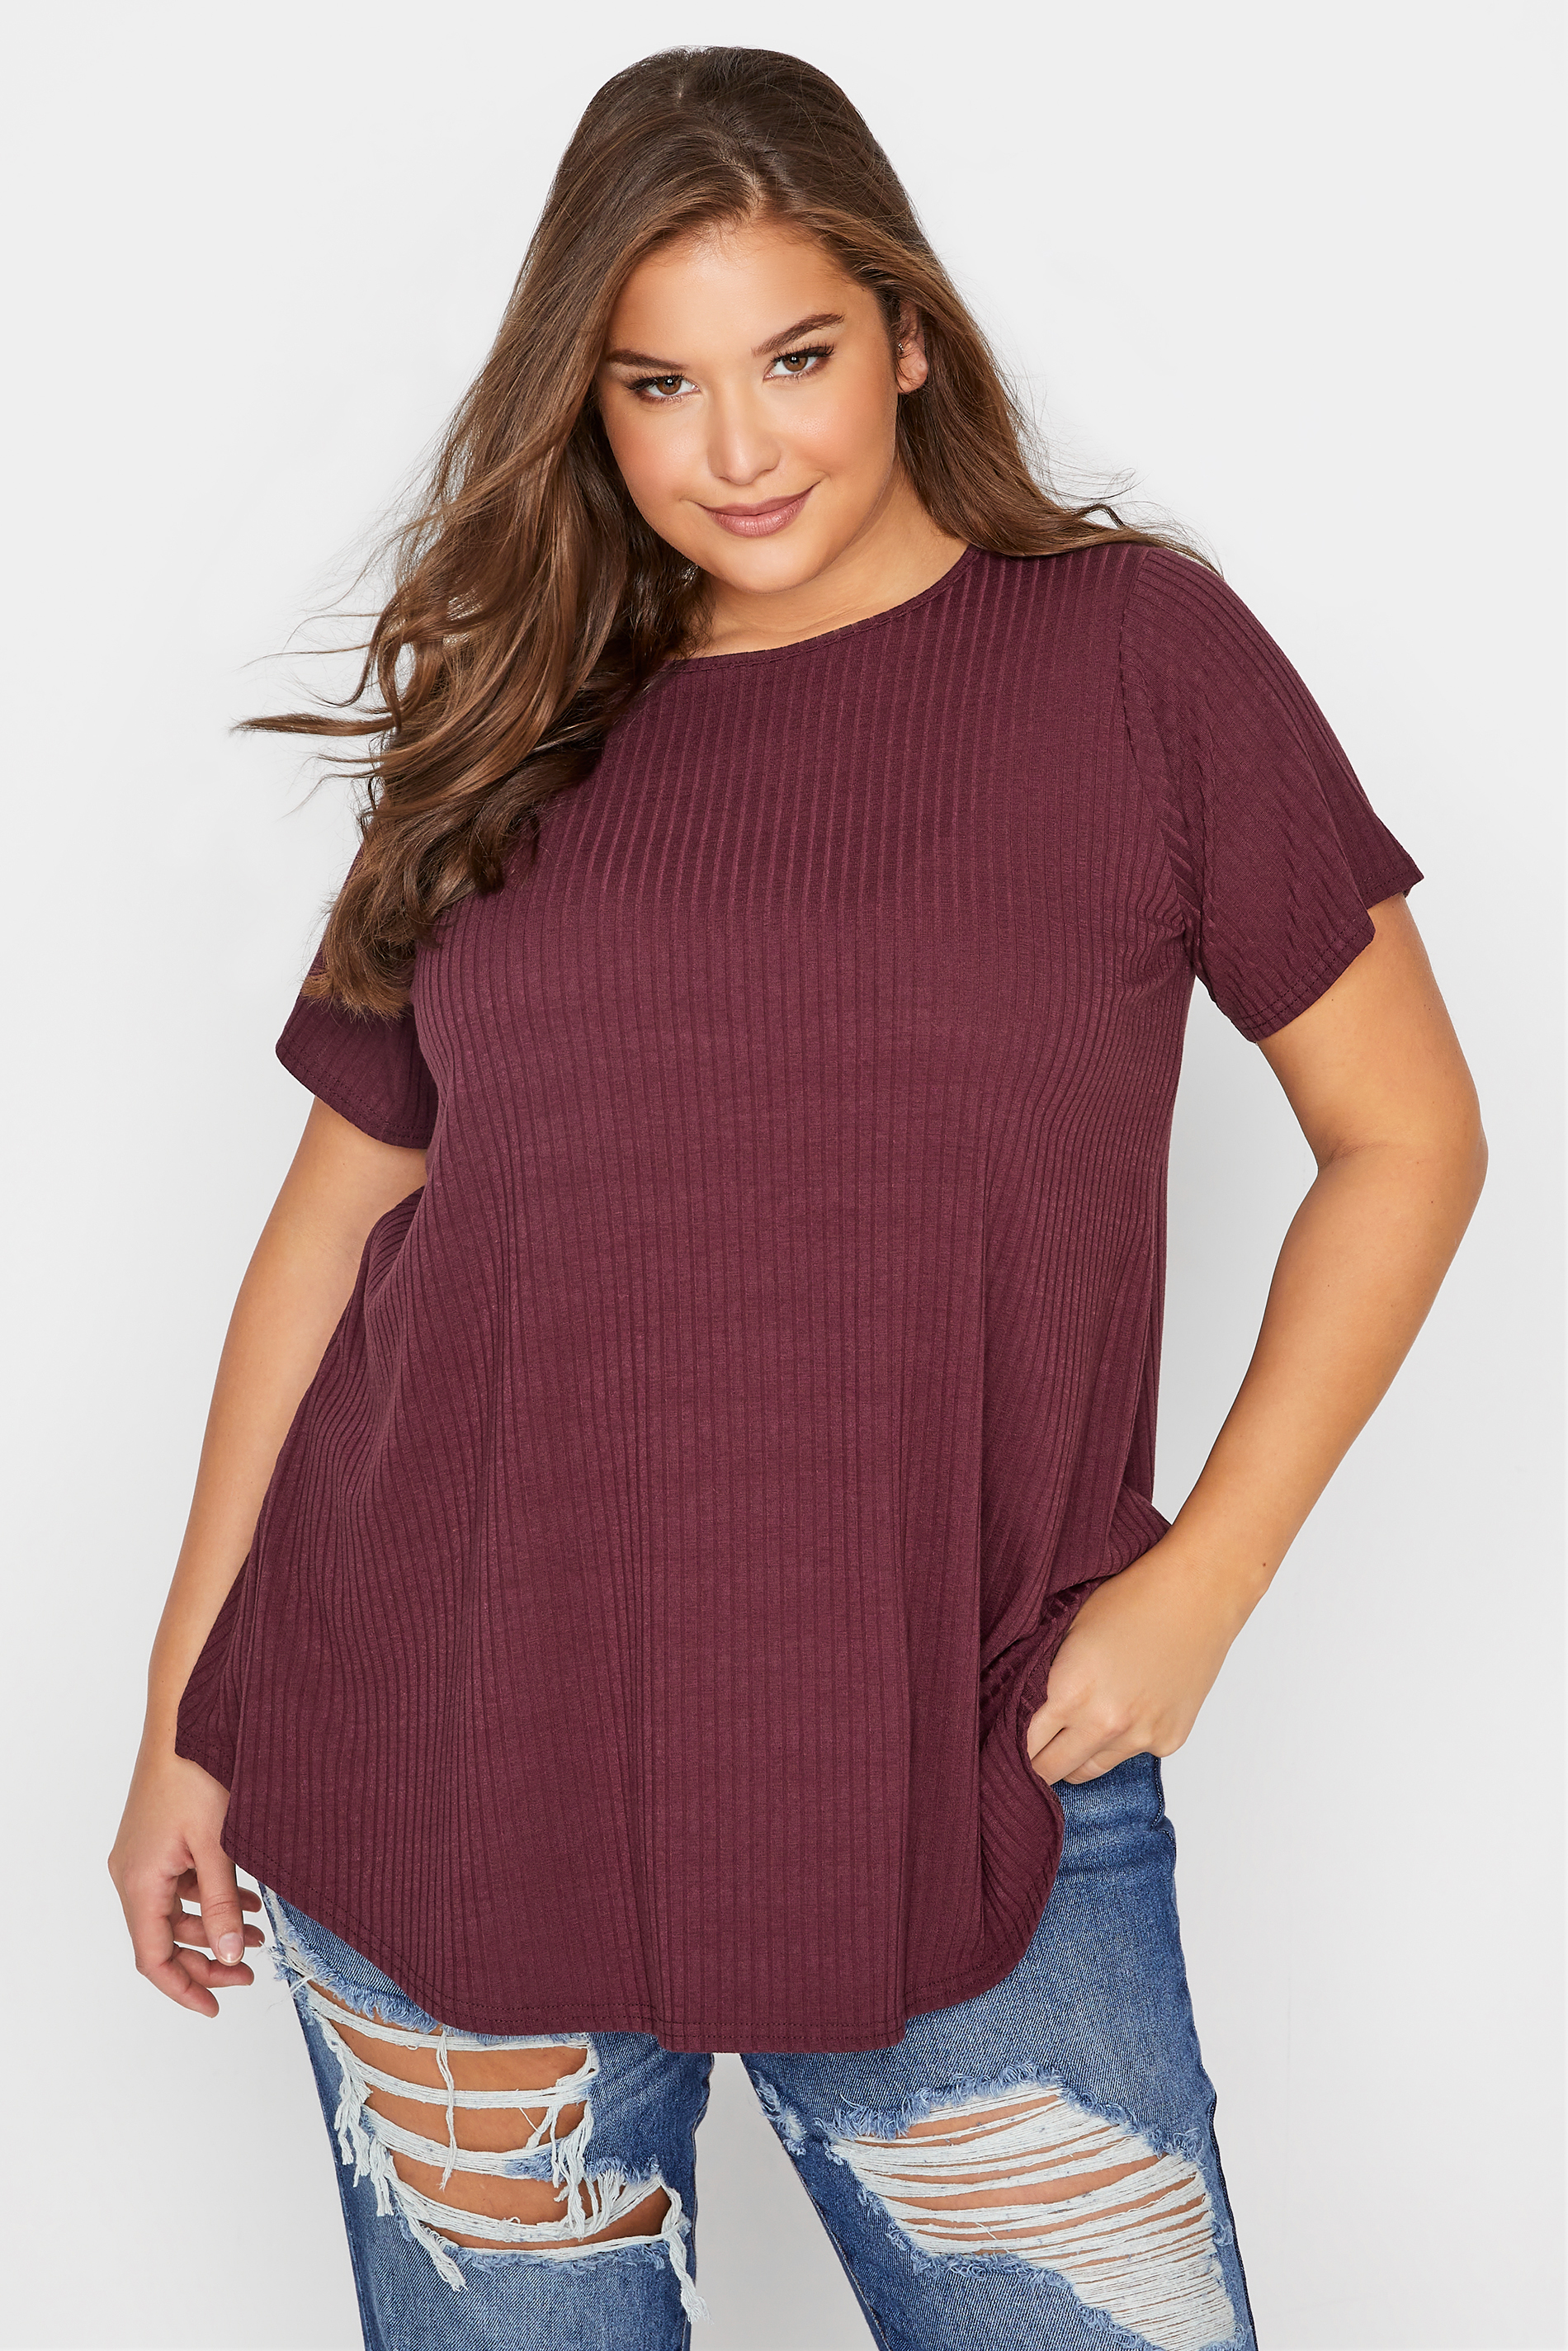 LIMITED COLLECTION Curve Purple Rib Swing Top_A.jpg